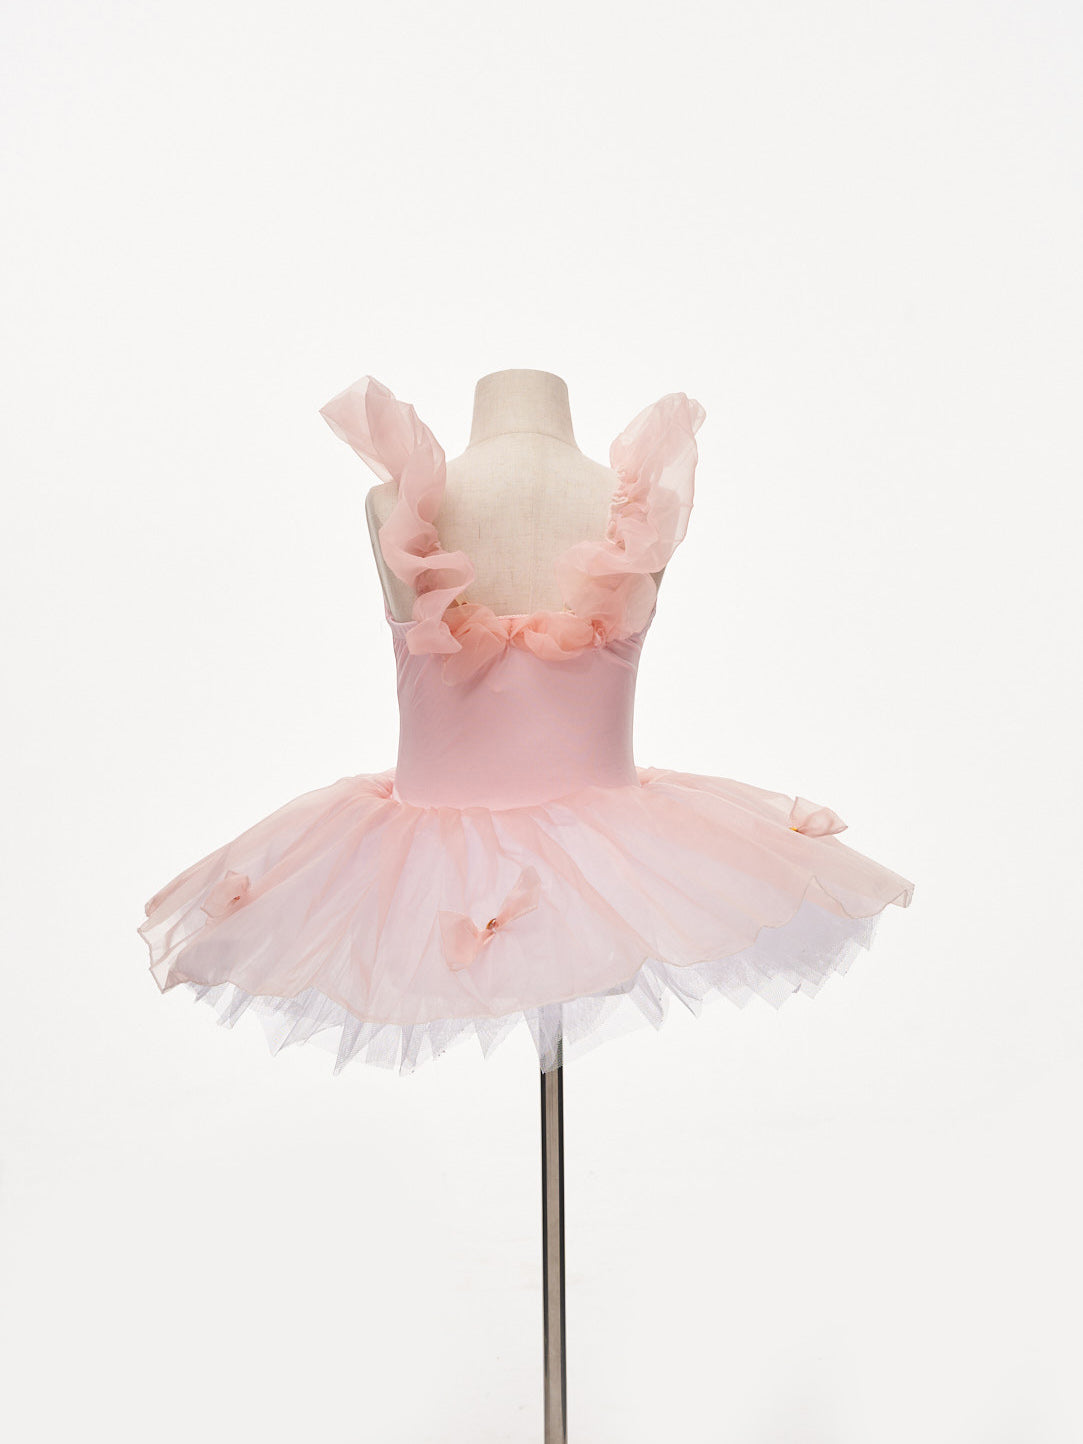 Kate Light Peachy Pink Bow Tie Sequin Ballet Kids Dress for Photography